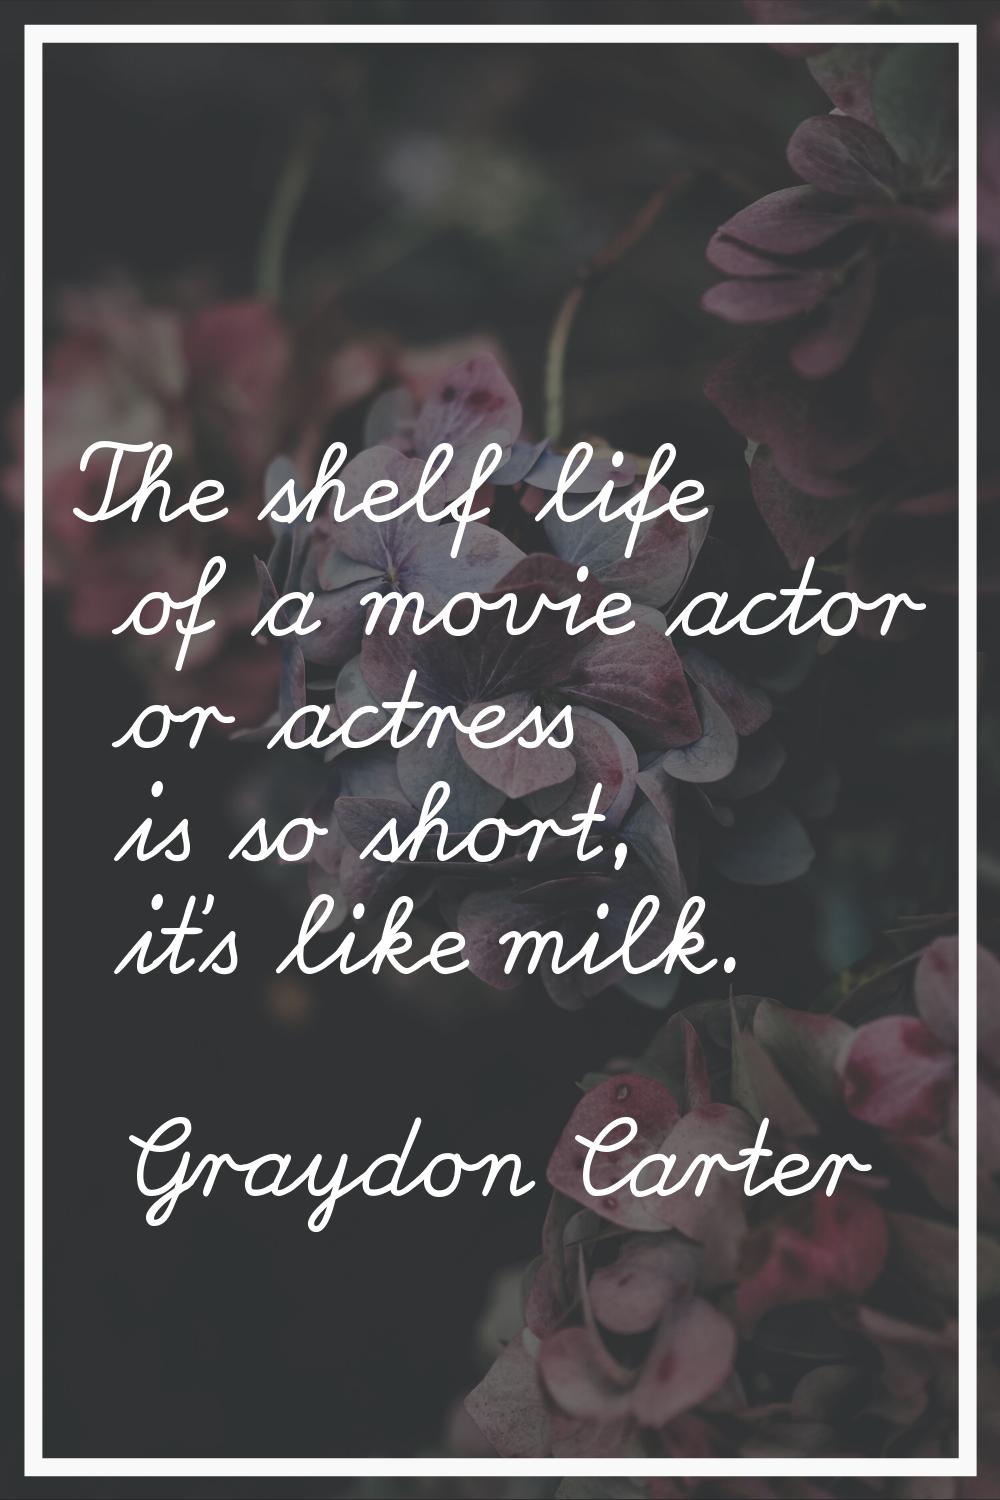 The shelf life of a movie actor or actress is so short, it's like milk.